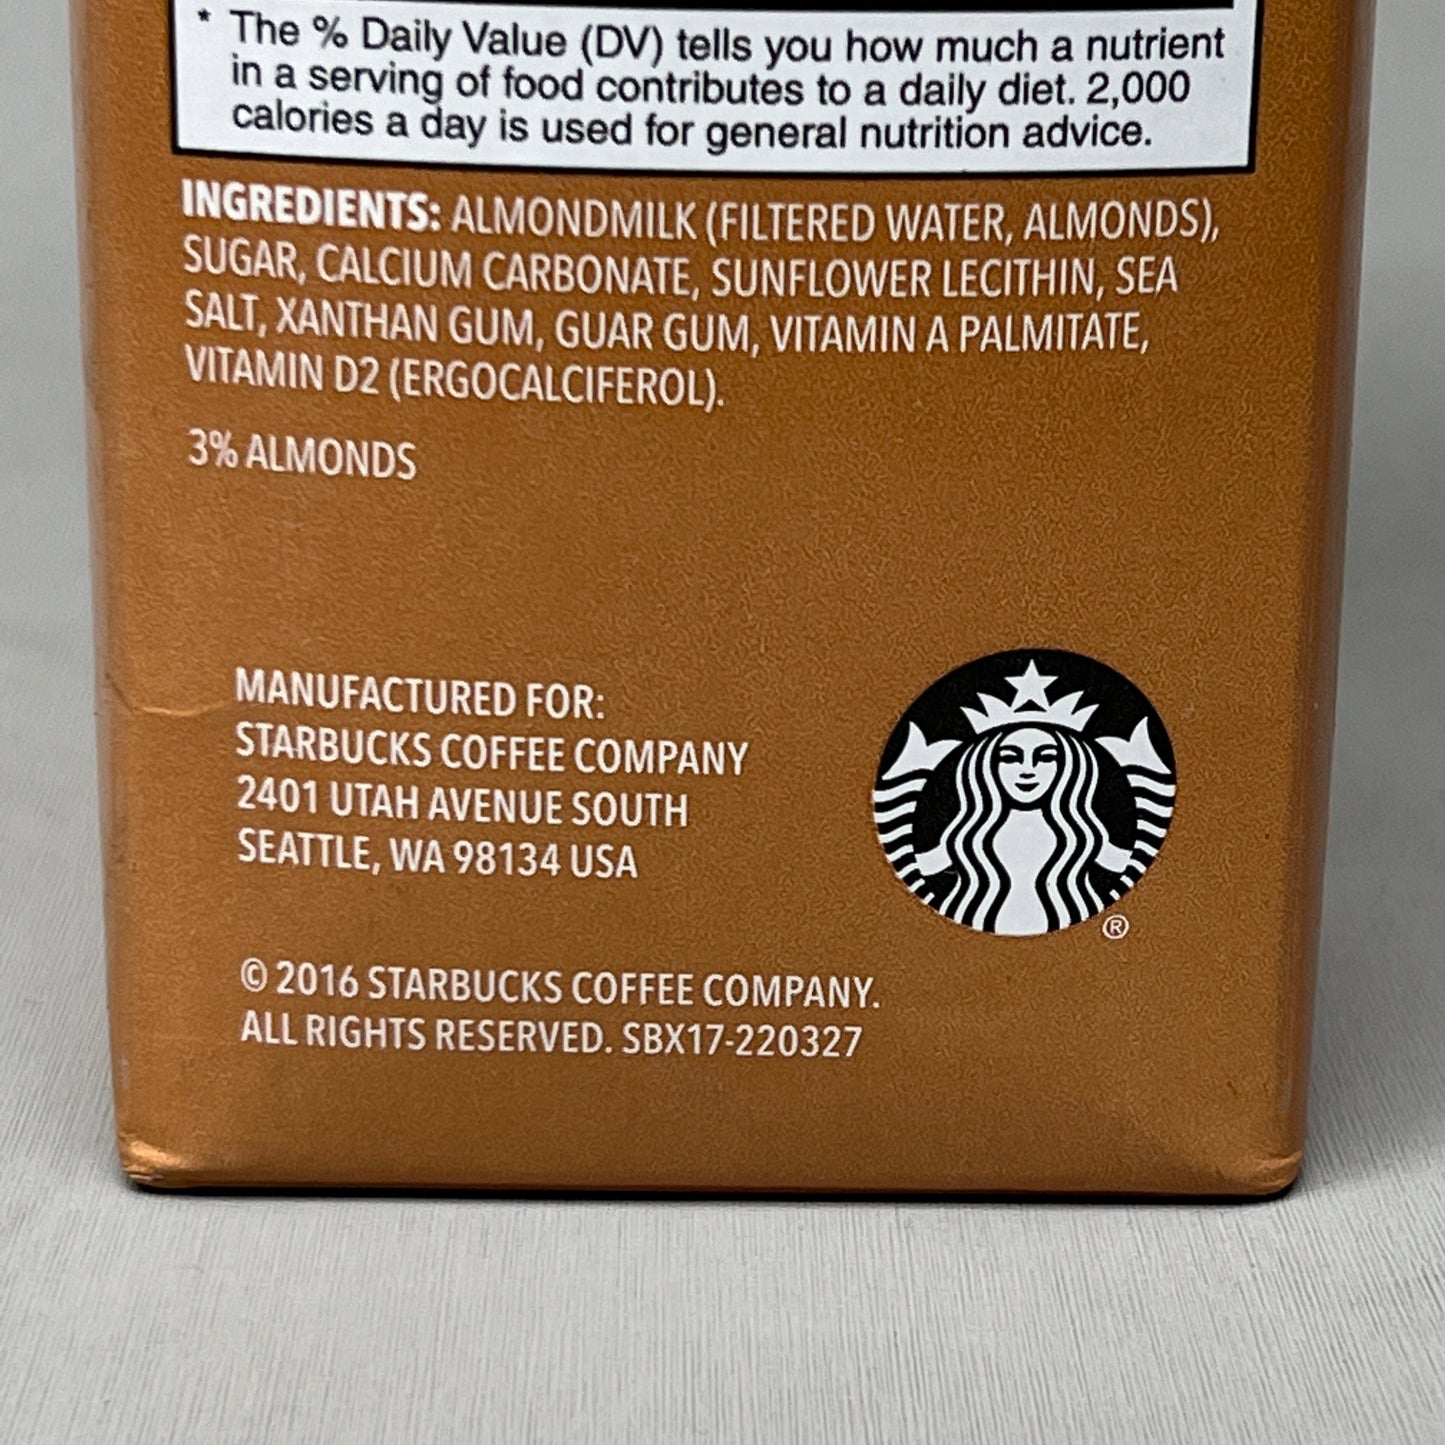 8-PK! STARBUCKS Unflavored Almond Milk Fortified Beverage 64 fl oz BB 09/23 (New, AS-IS)